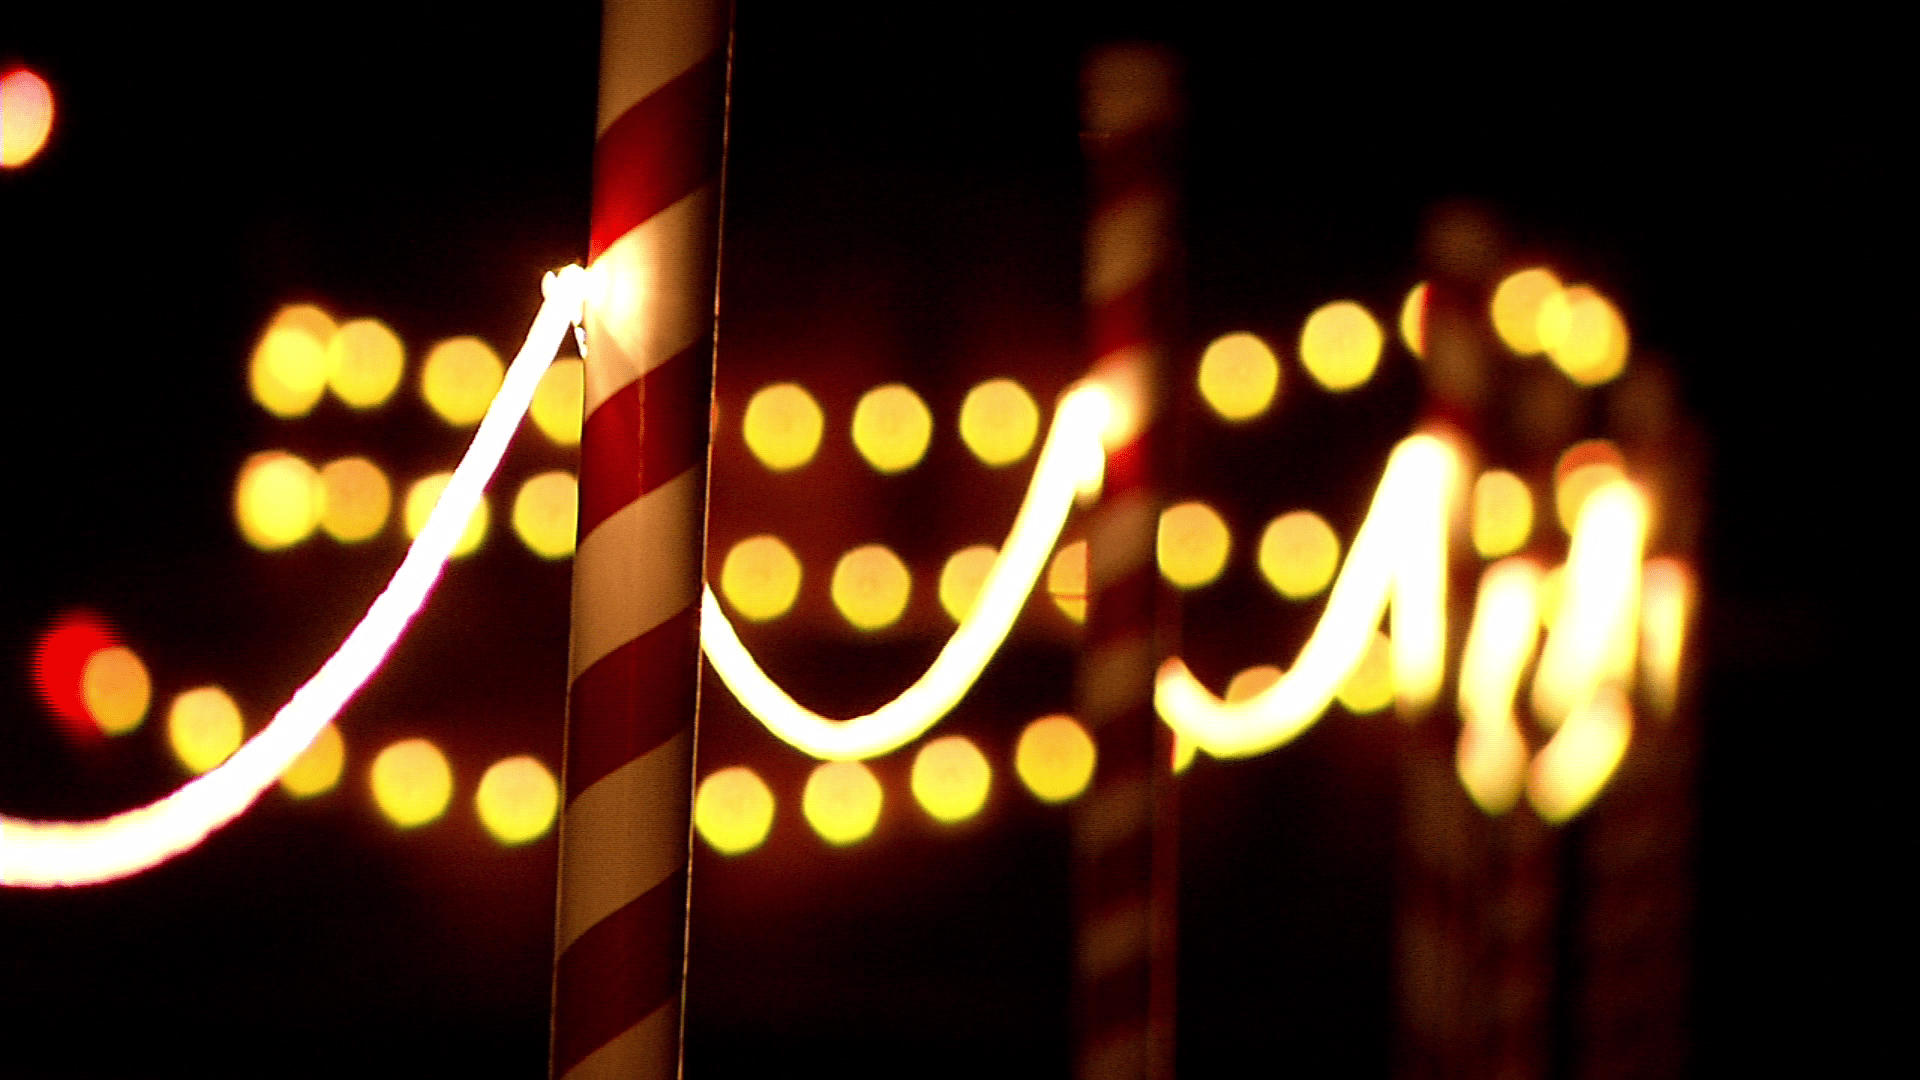 A pole with red and white stripes is lit up at night. - Christmas lights, fairy lights